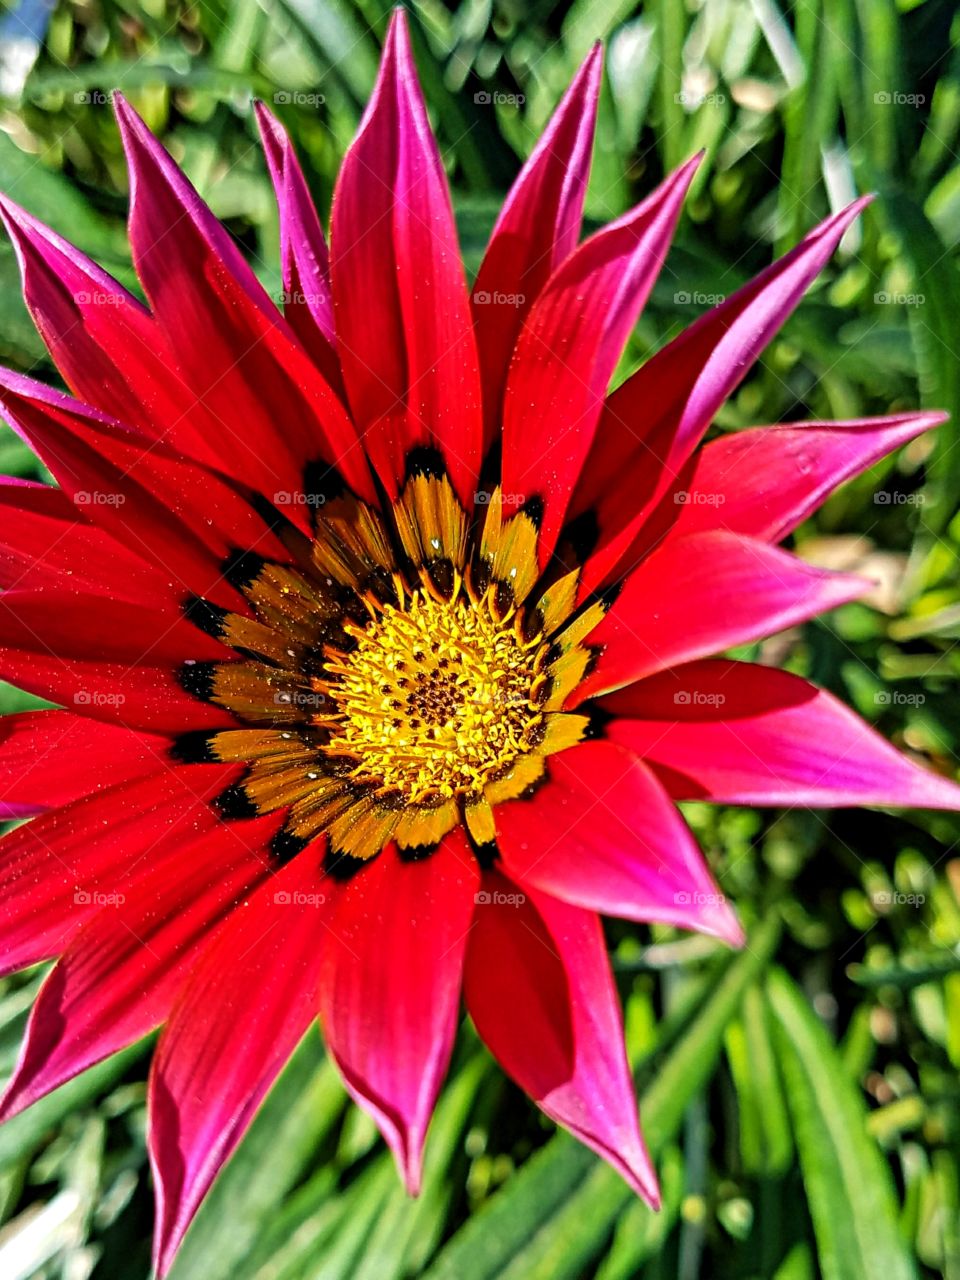 Bright Red Daisy with Yellow Center!